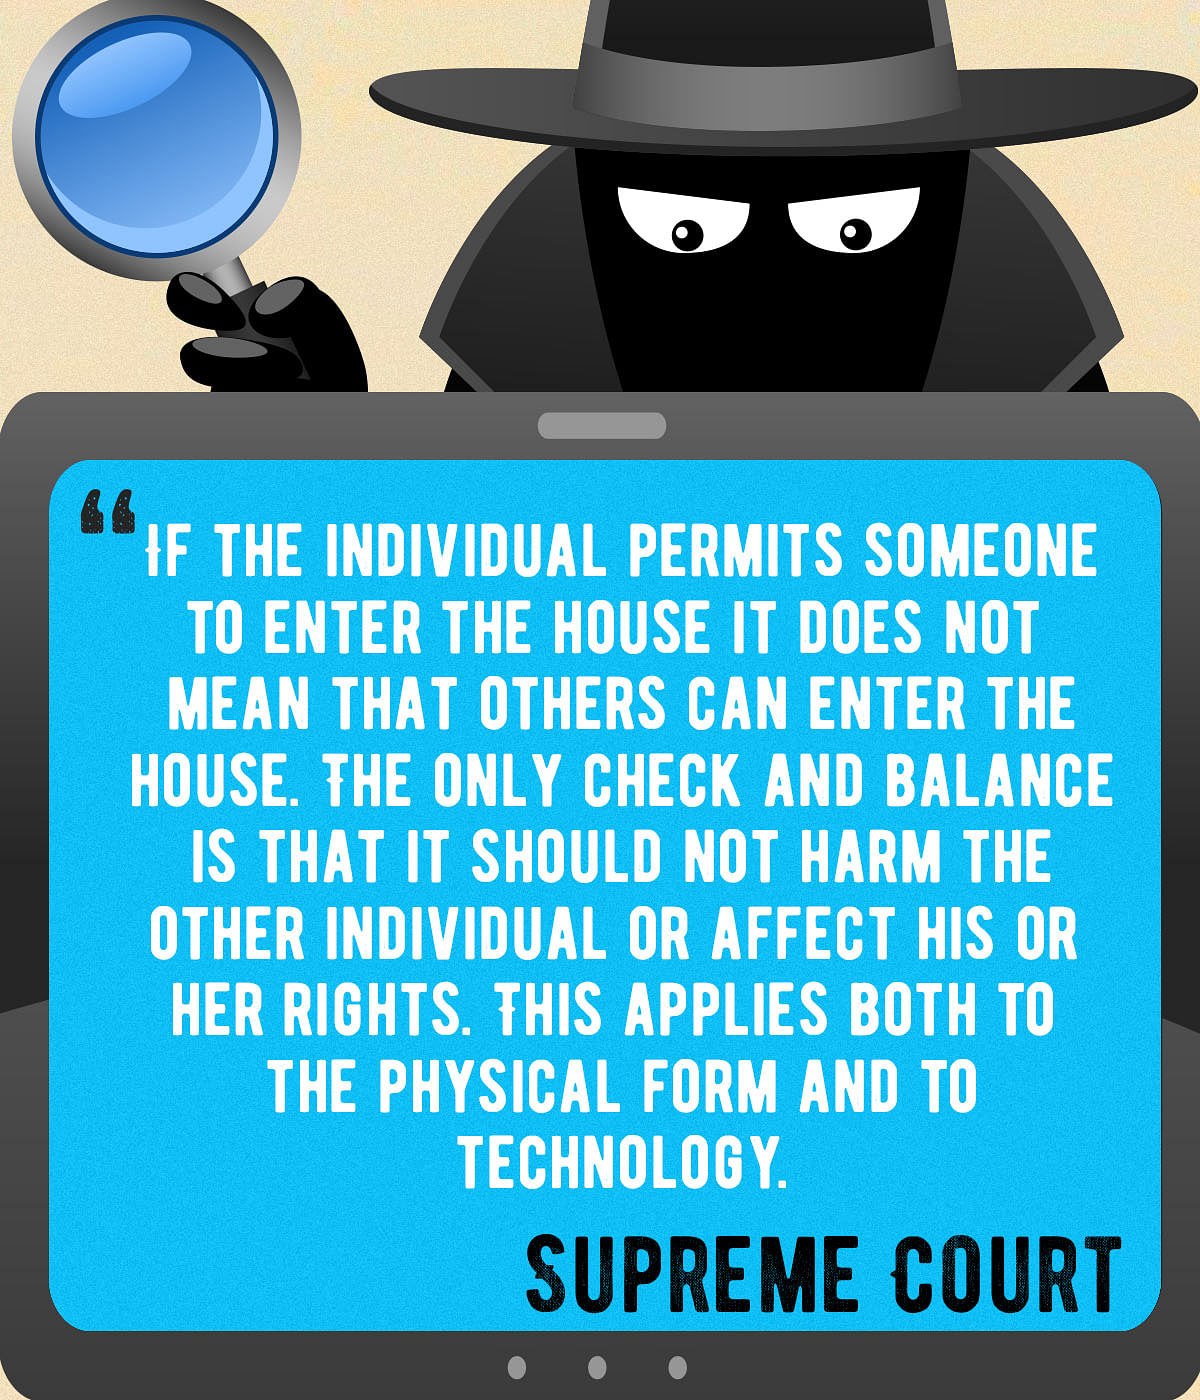 “Technology has made it possible to enter a citizen’s house without knocking at his/her door,” says Supreme Court.